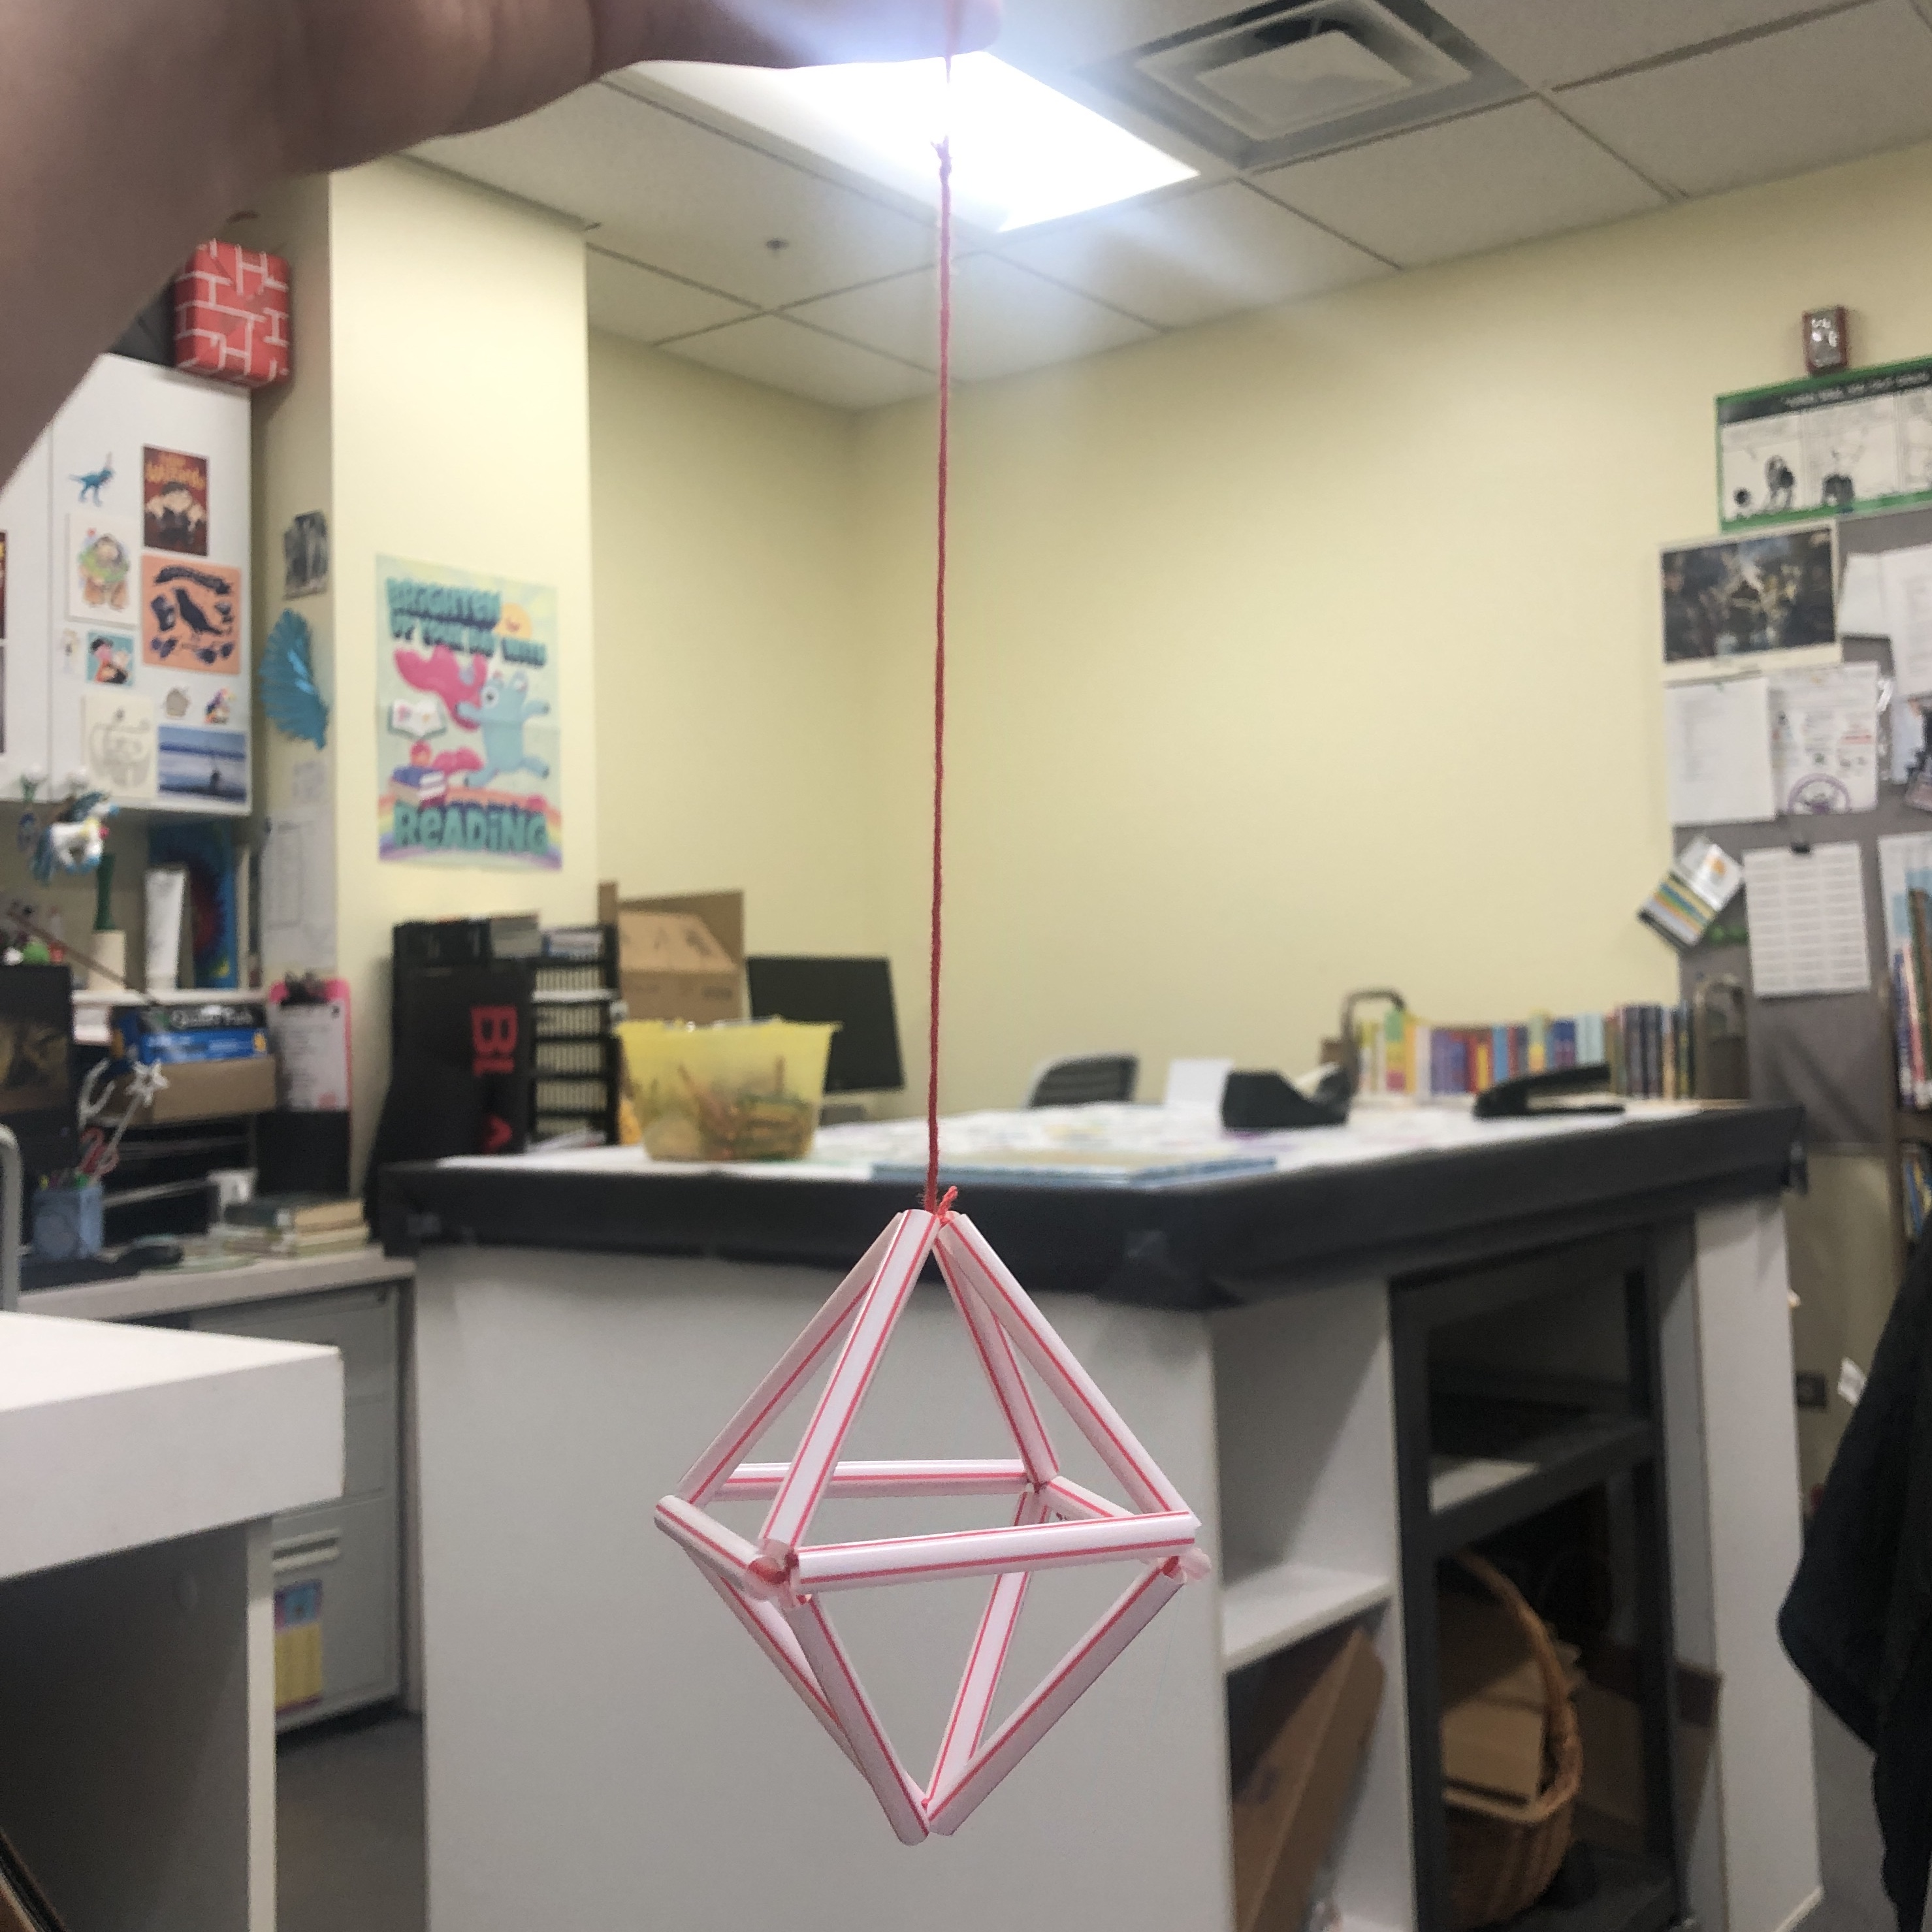 Photo of a hanging geometric diamond shape made out of straws and string.